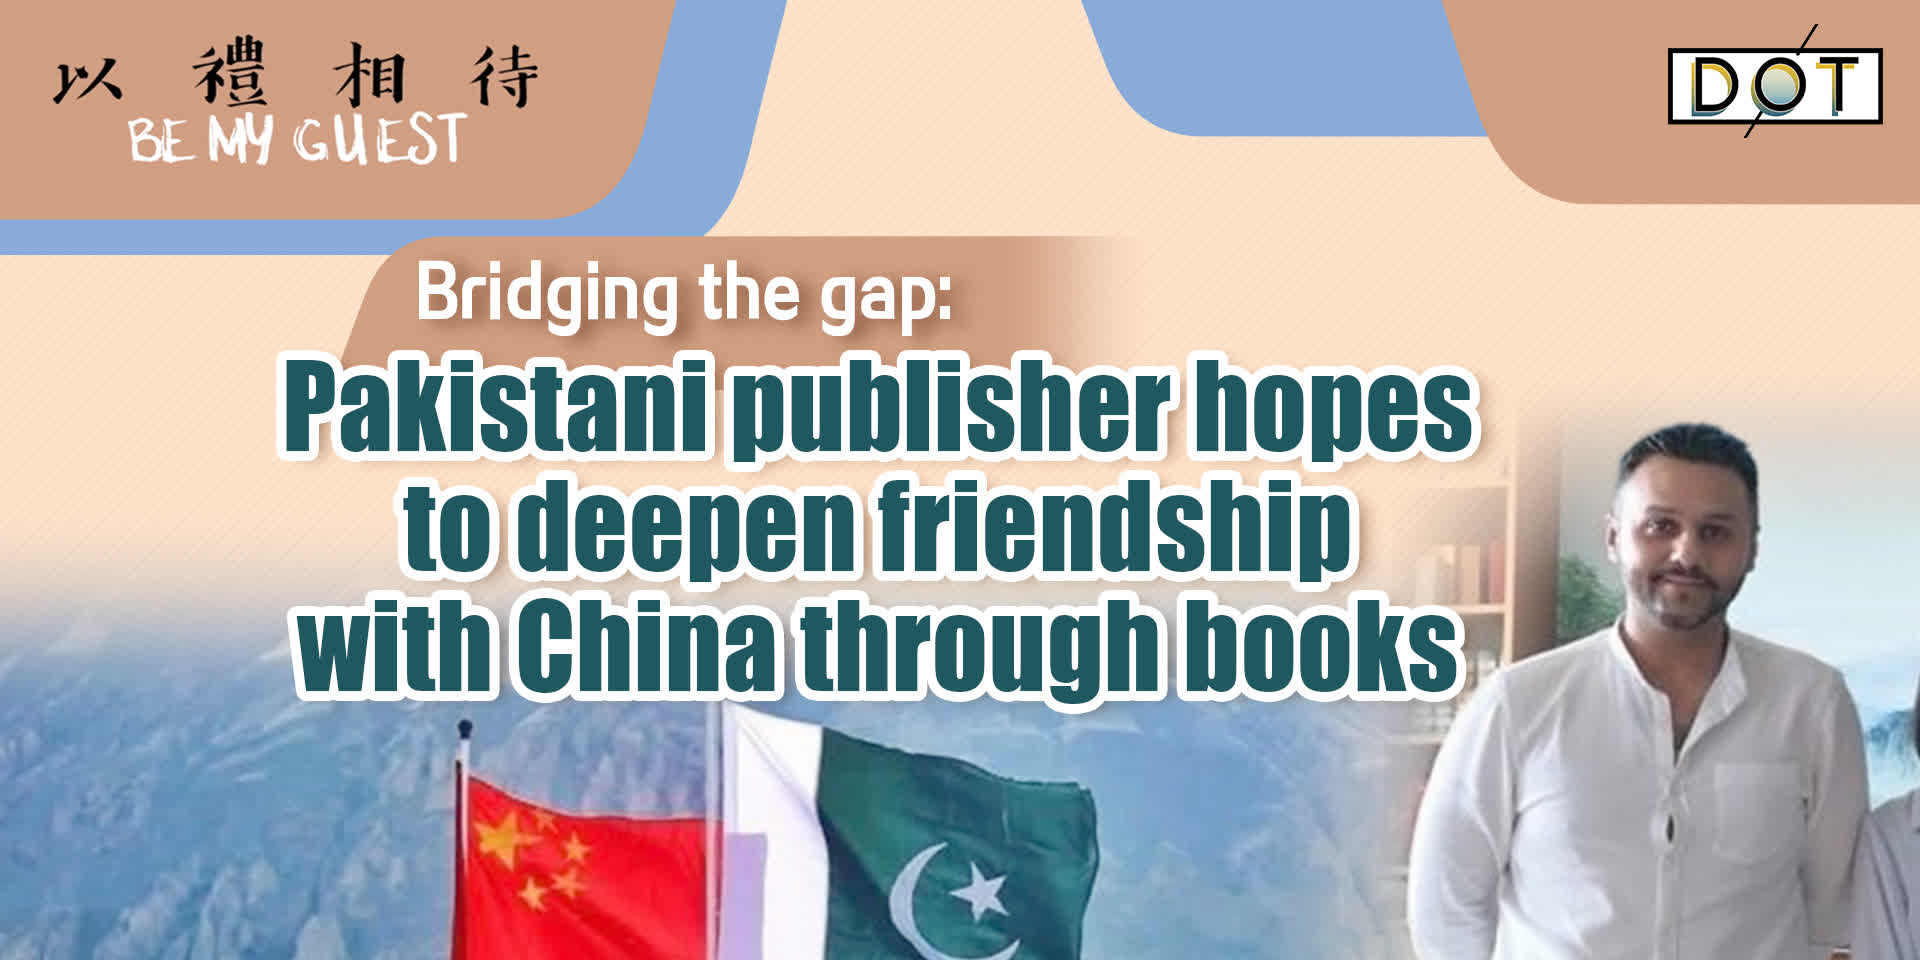 Be My Guest | Bridging the gap: Pakistani publisher hopes to deepen friendship with China through books